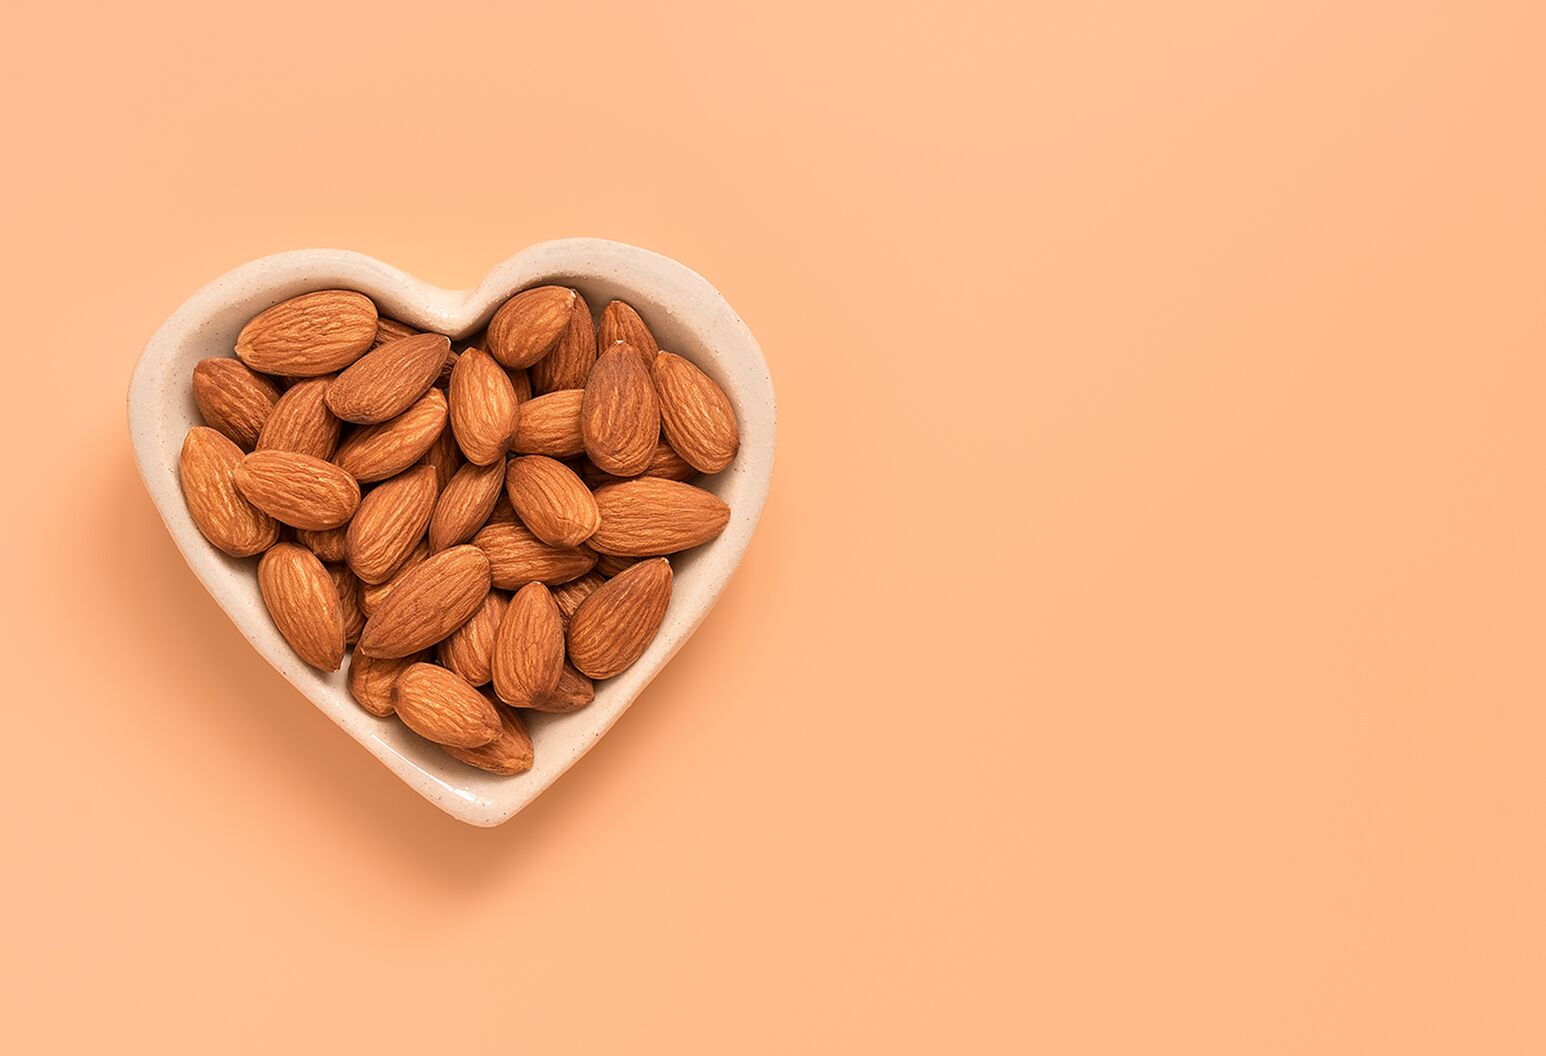 The Top 5 Nuts for Brain Health